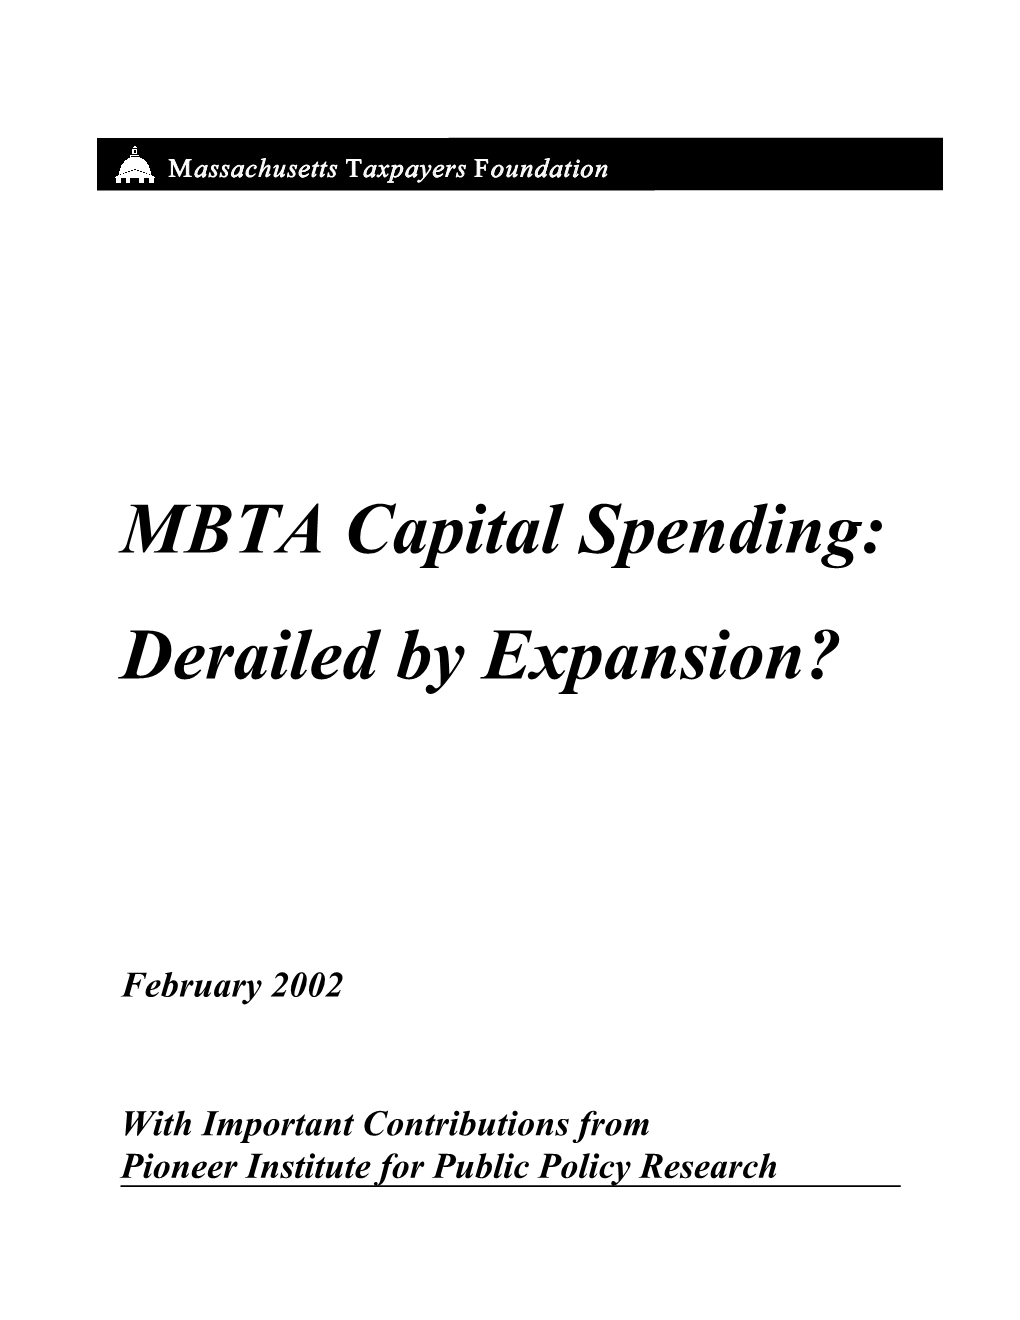 MBTA Capital Spending: Derailed by Expansion?